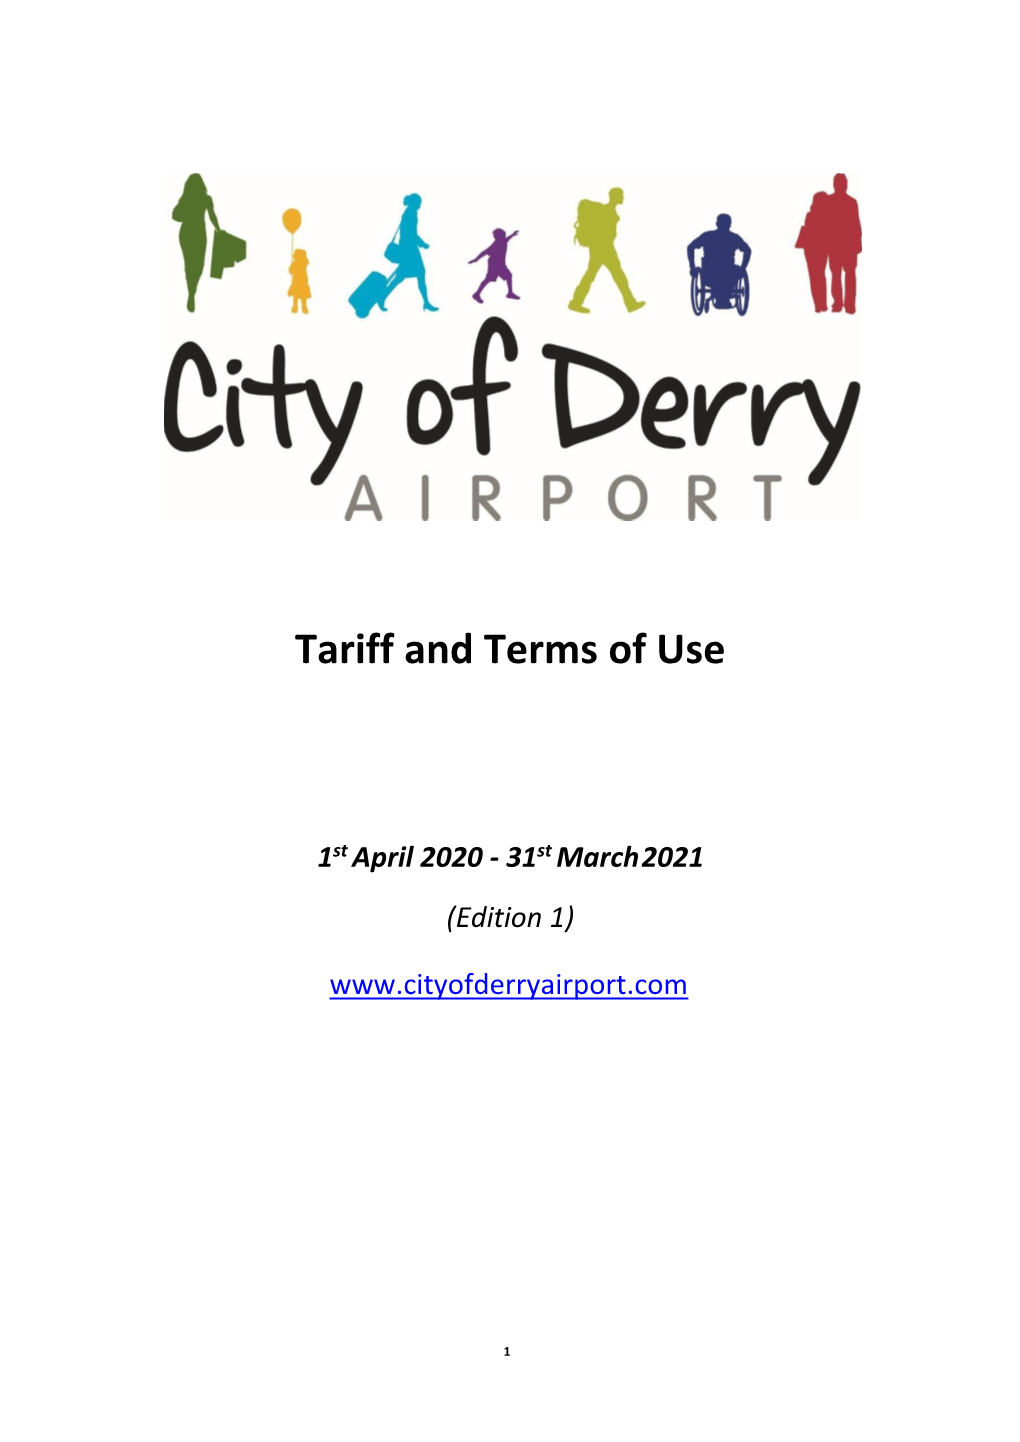 Tariff and Terms of Use